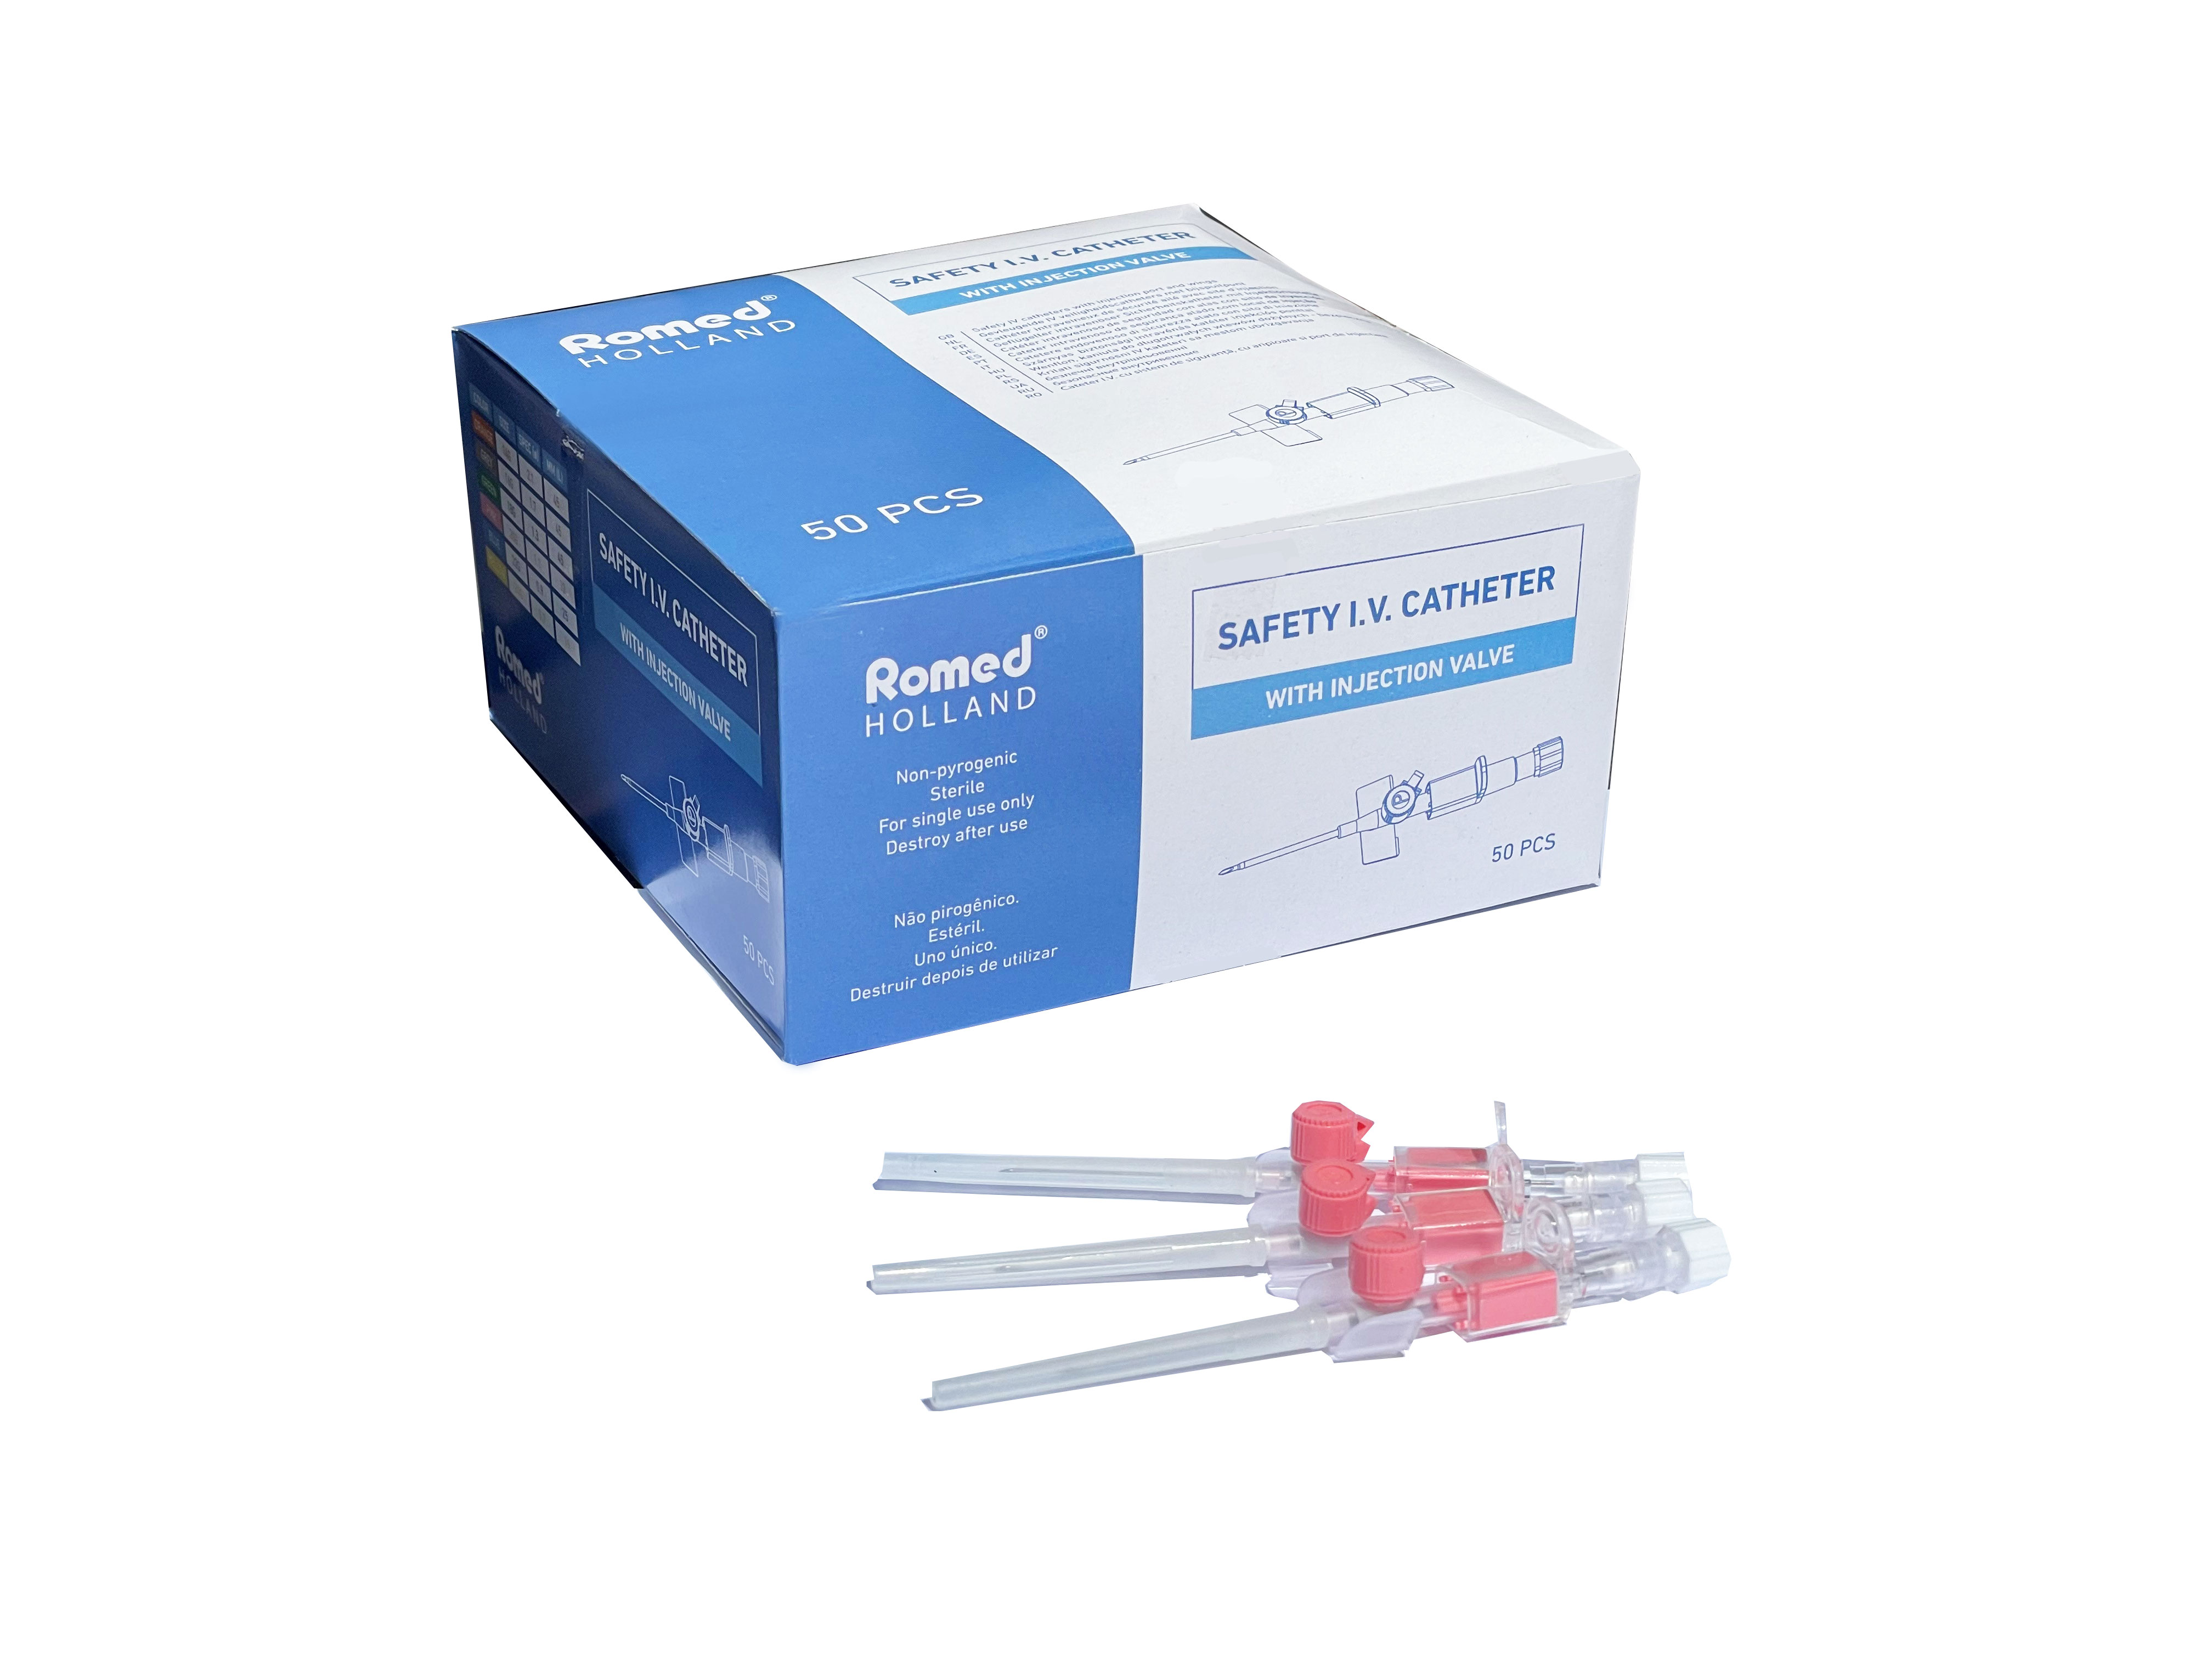 S-IVCATH-22G Romed Safety I.V. catheters with injection valve, 22G, sterile per piece, 50 pcs in an inner box, 10 x 50 pcs = 5000 pcs in a carton.